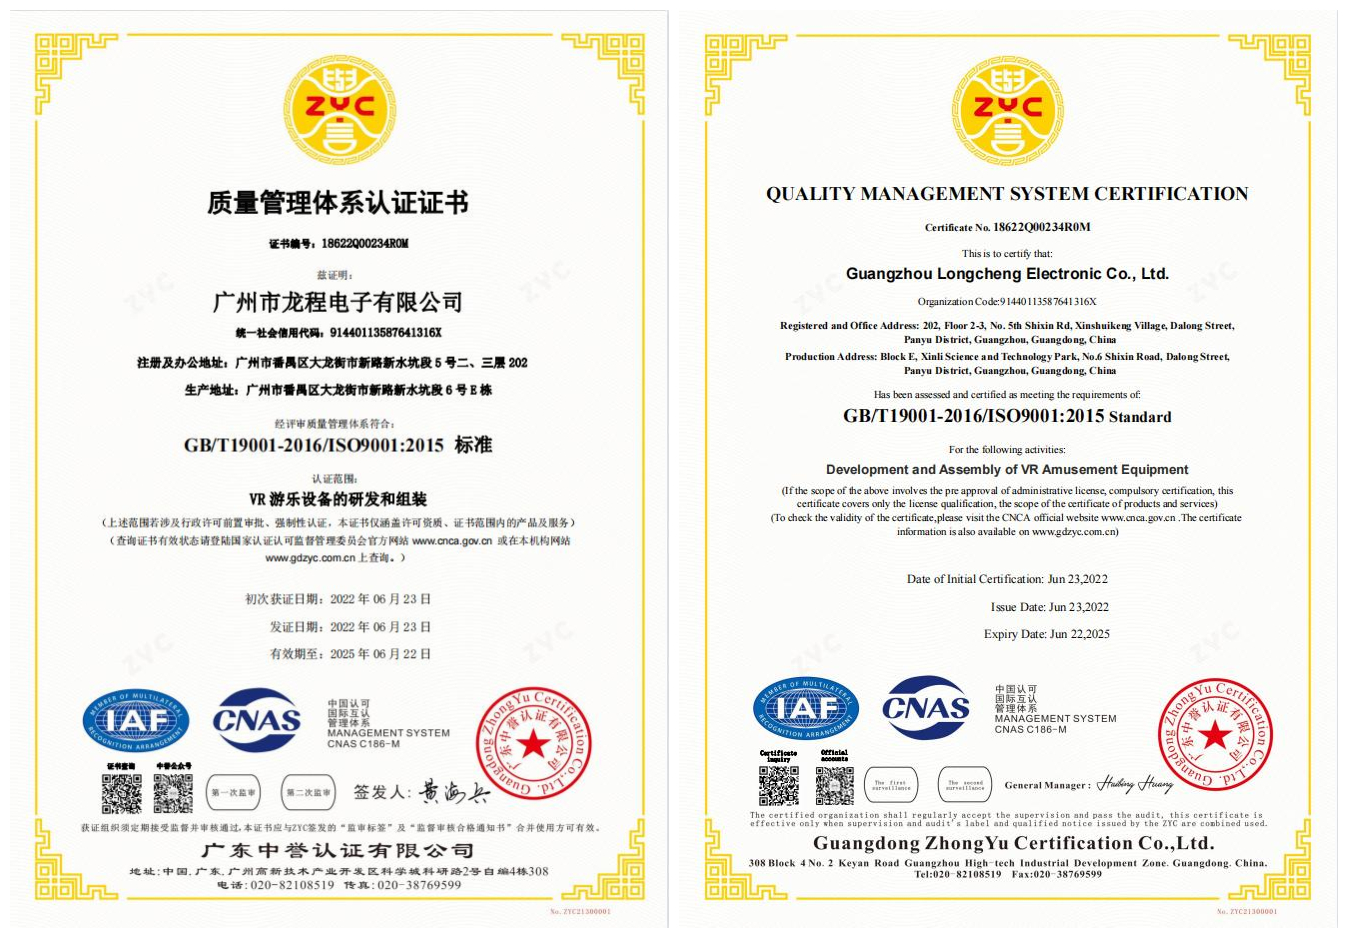 VART VR won the ISO9001 quality management system certification